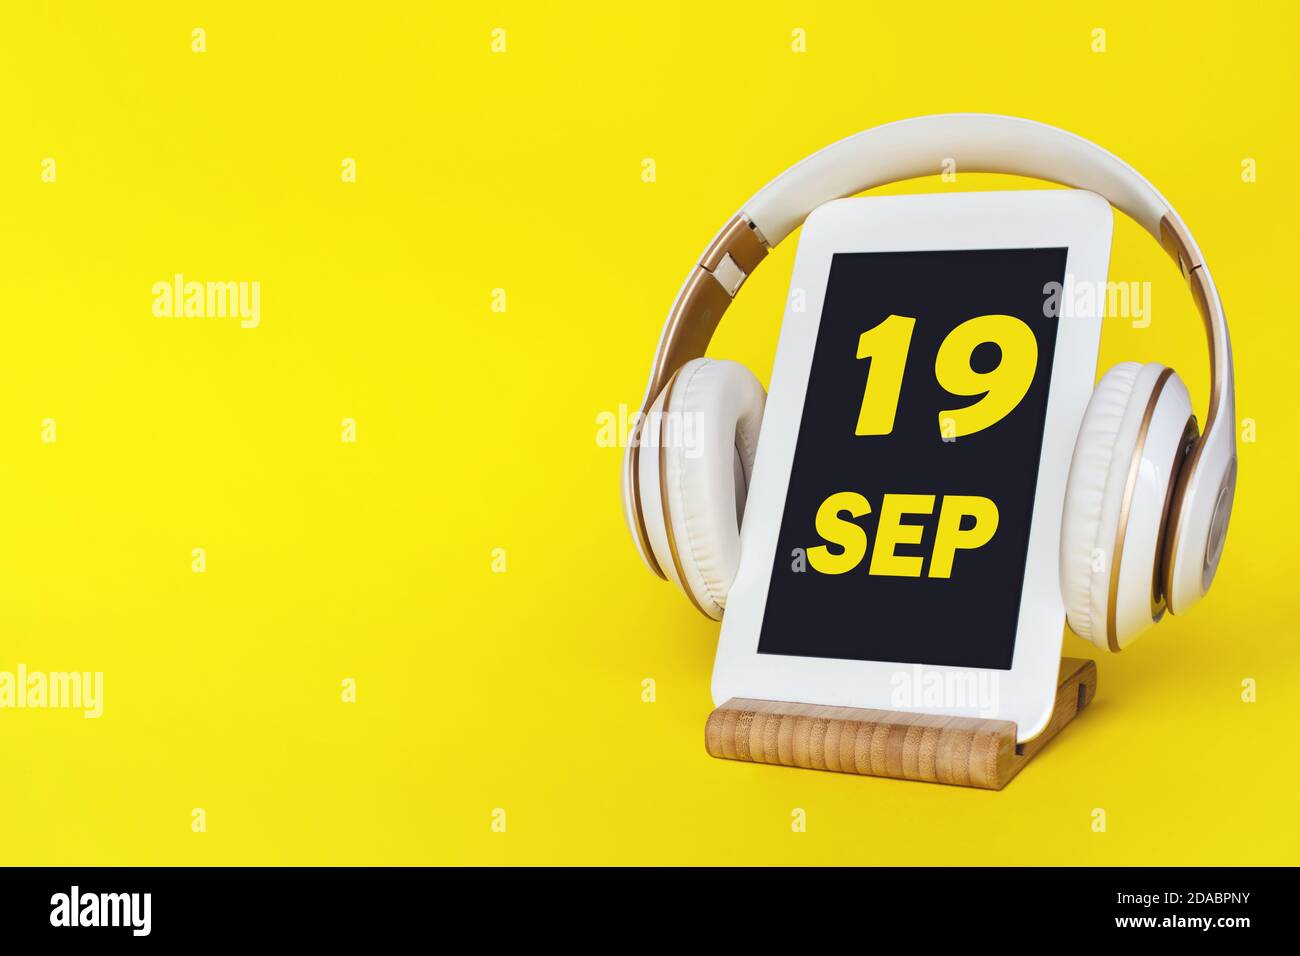 September 19th. Day 19 of month, Calendar date. Stylish headphones and modern tablet on yellow background. Space for text. Education, technology, life Stock Photo